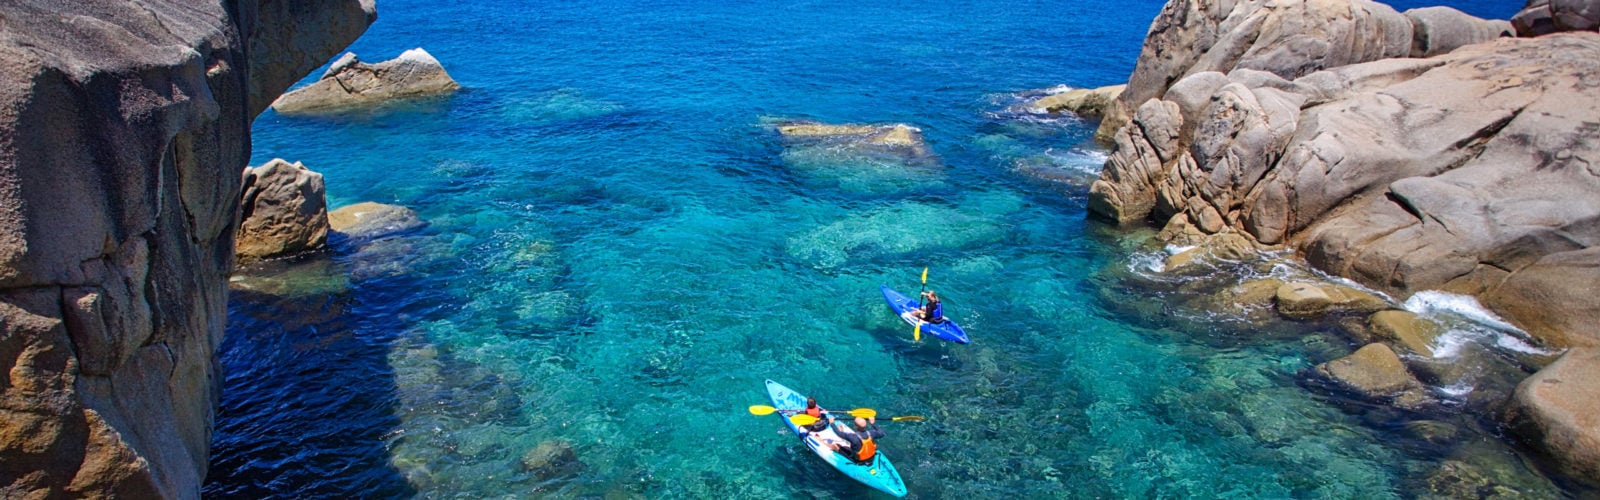 Kayaking on the crystal clear waters at Six Senses Zil Pasyon in the Seycelles.